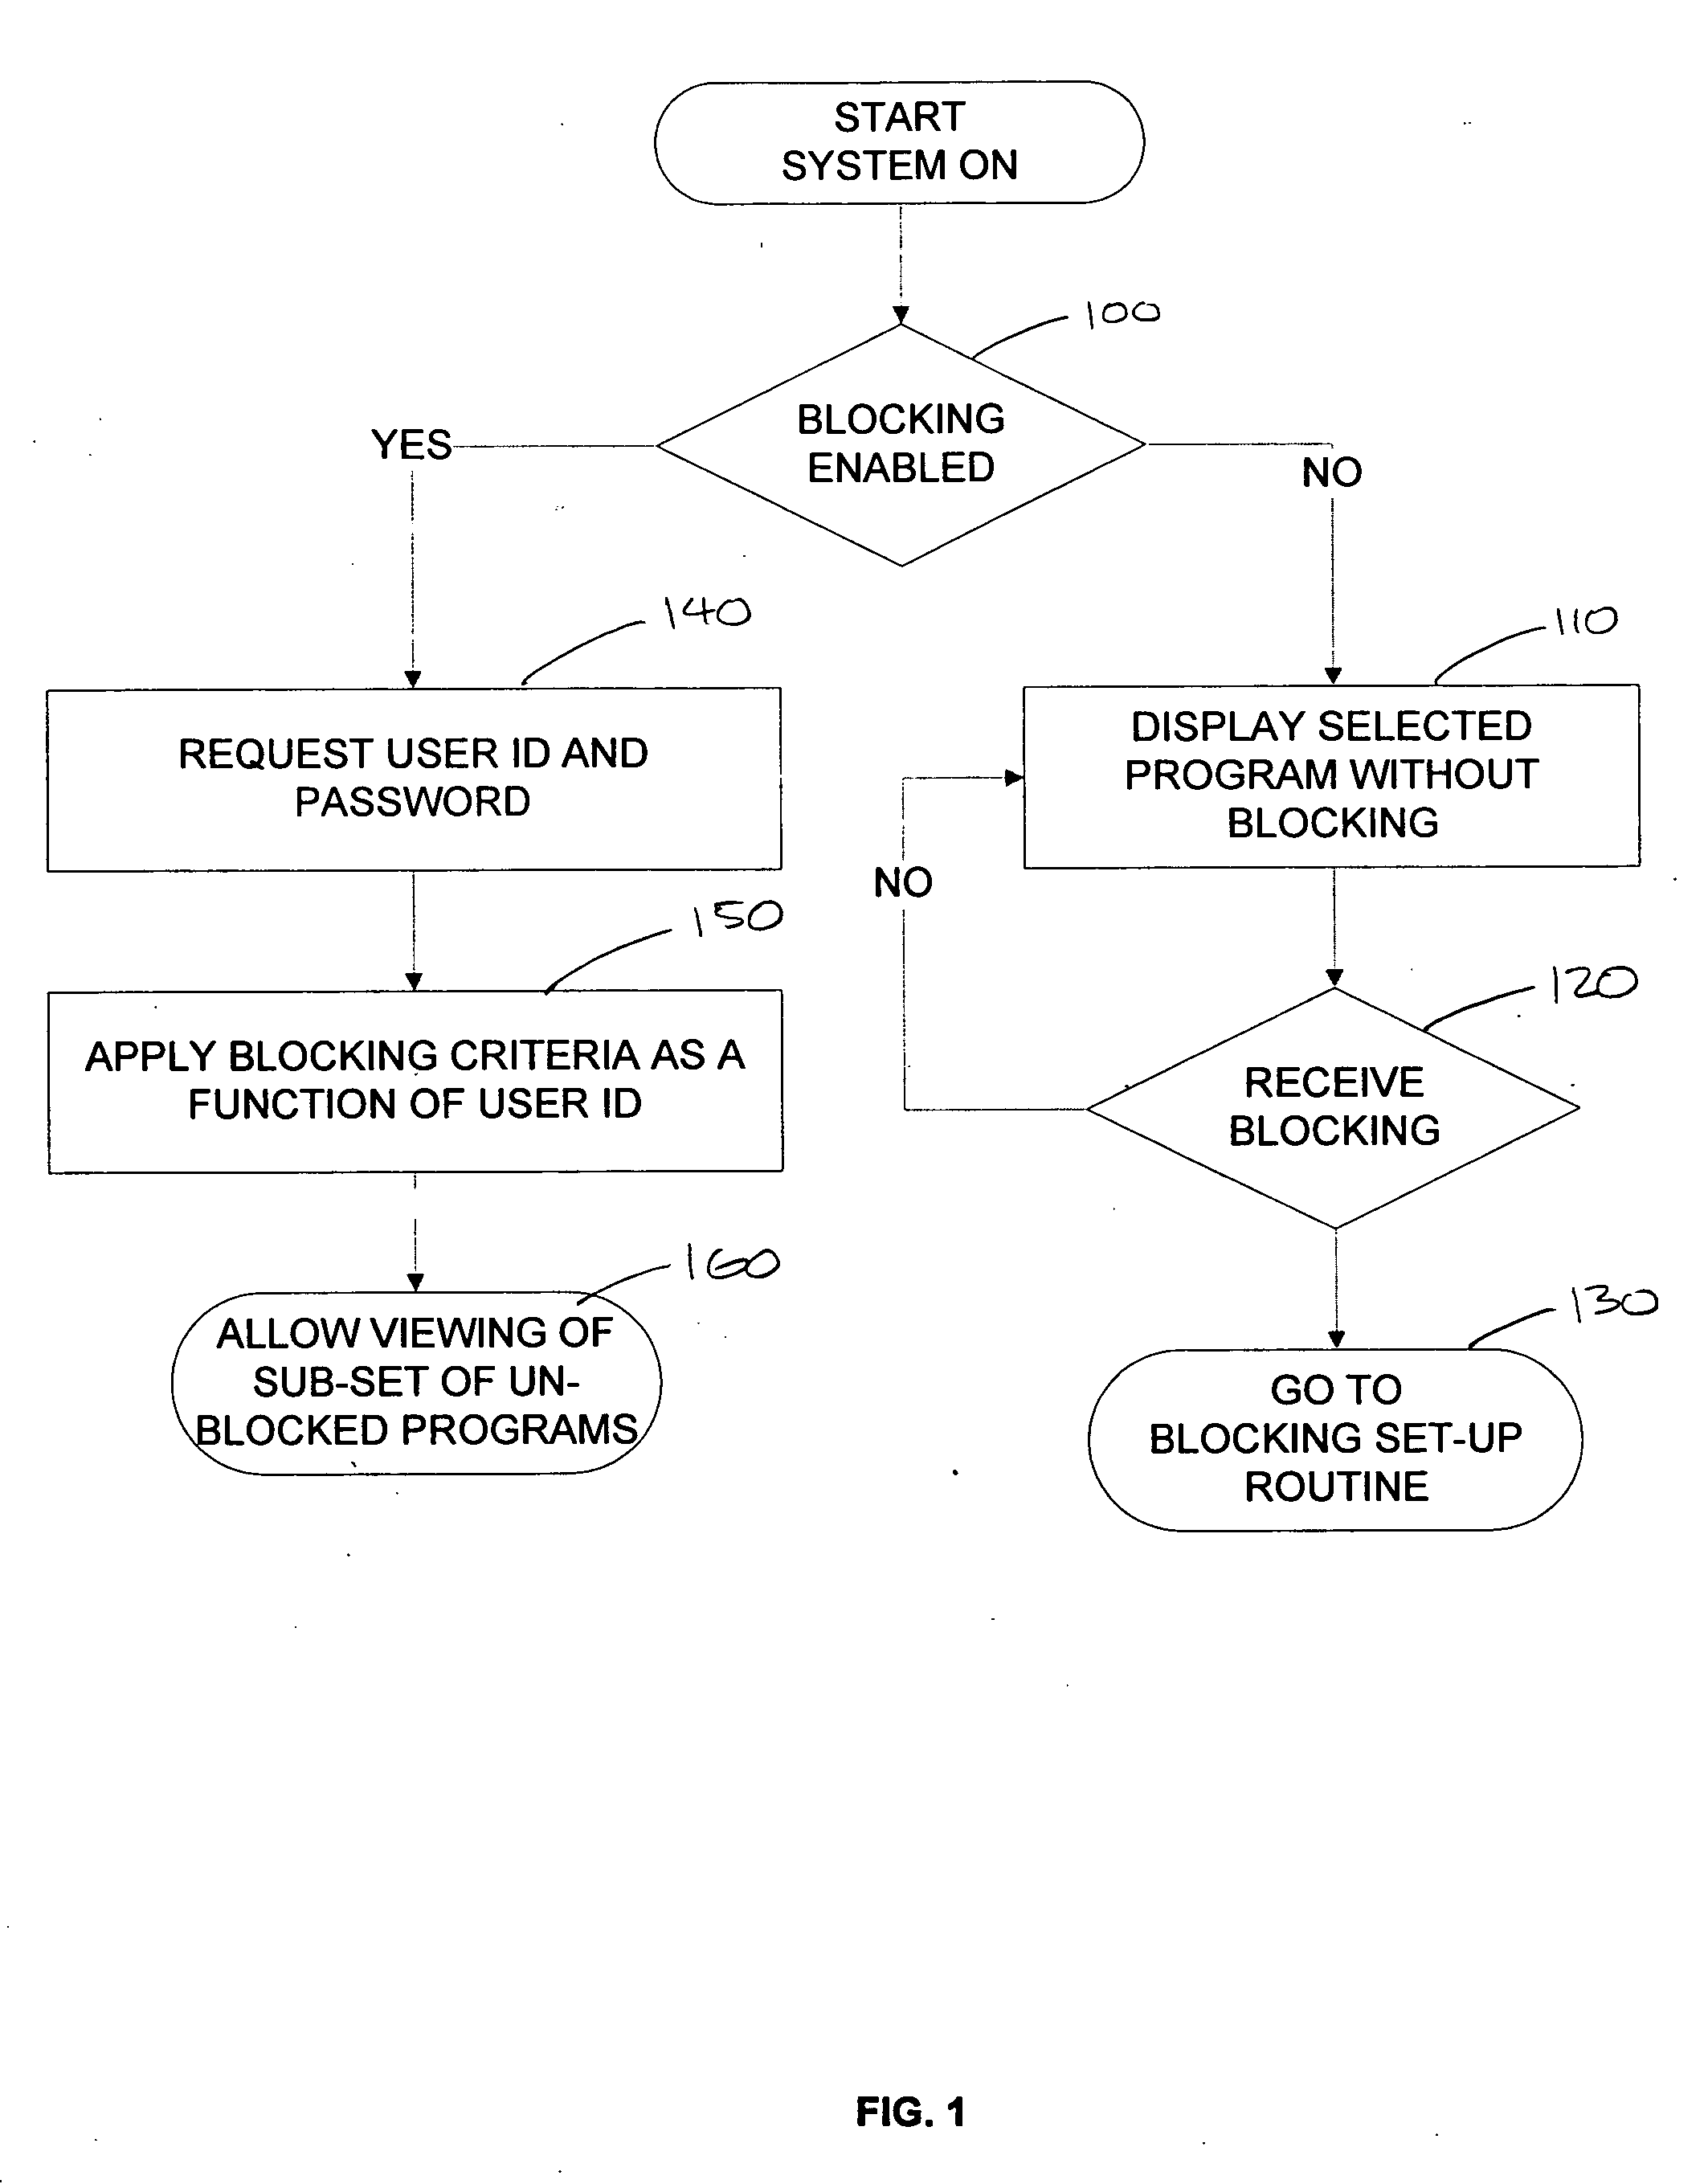 Apparatus and method for blocking audio/visual programming and for muting audio